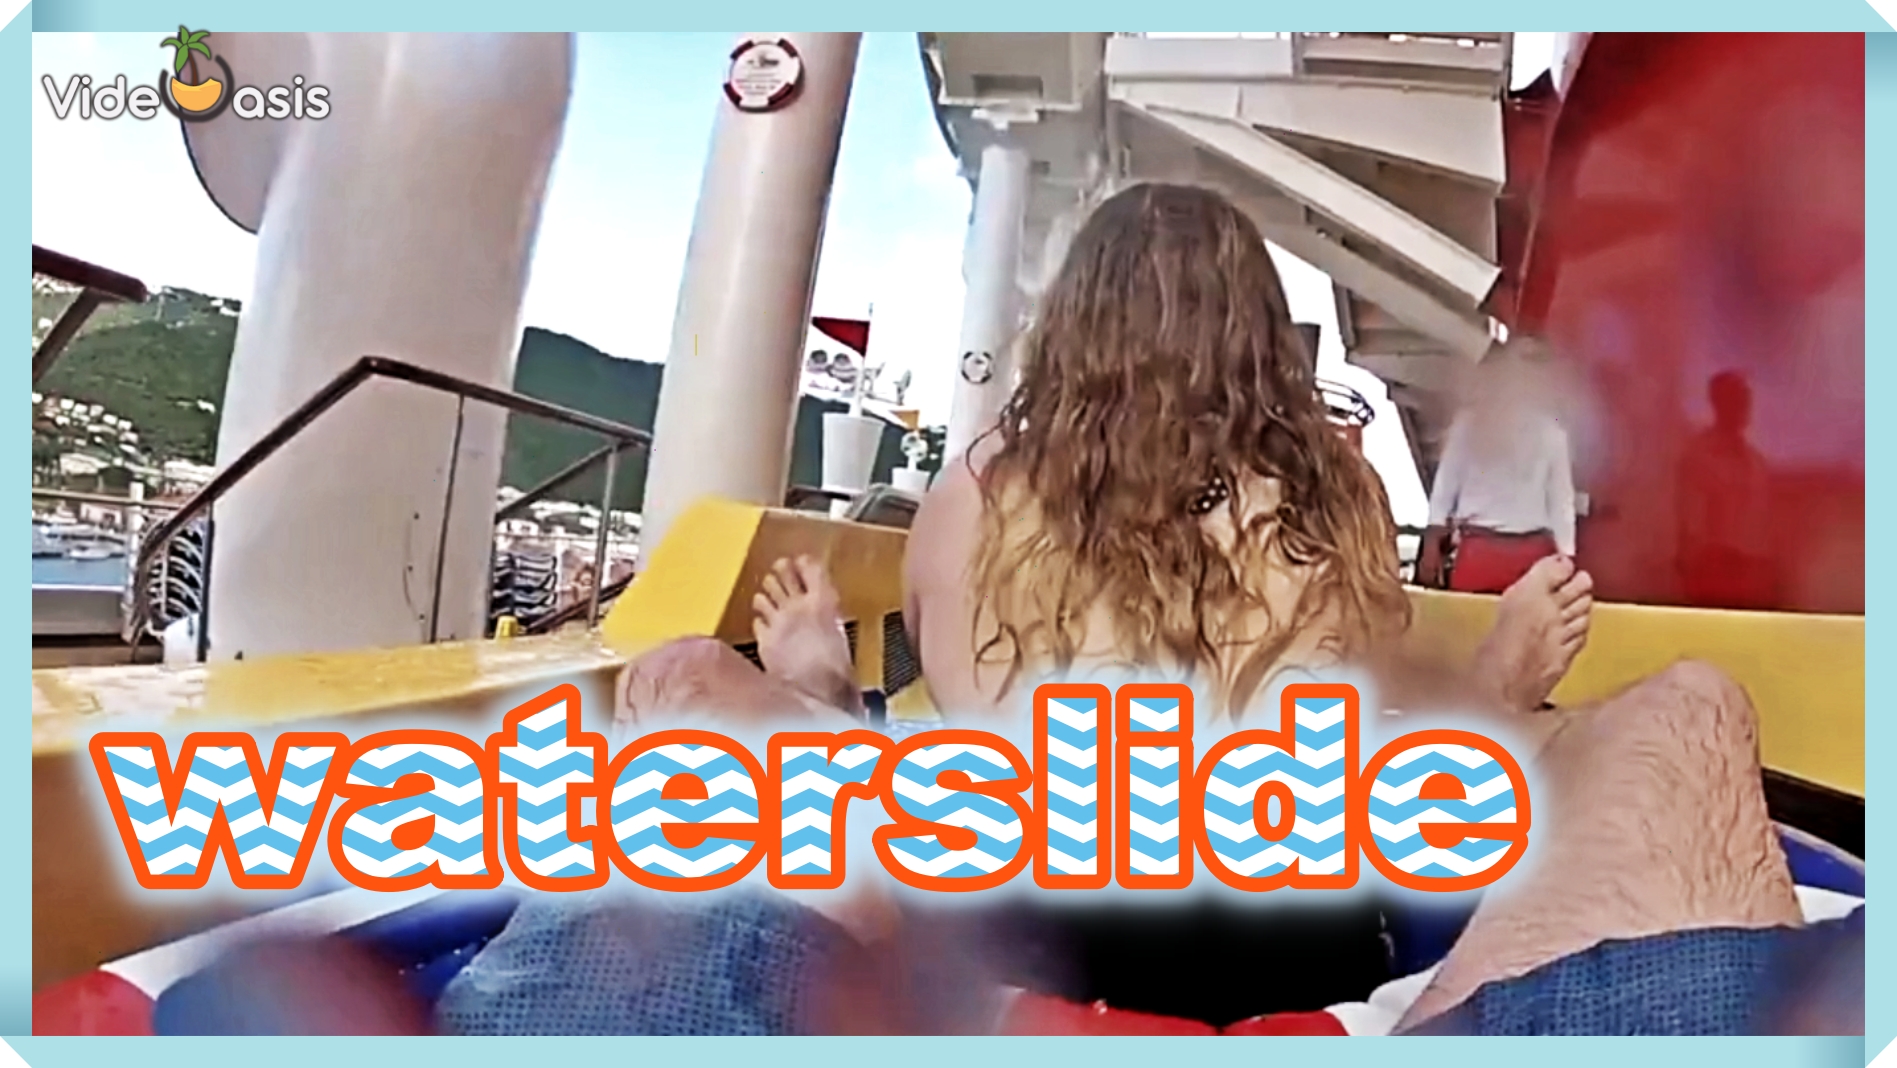 View of Caribbean On Cruise Ship Waterslide ｜VideOasis